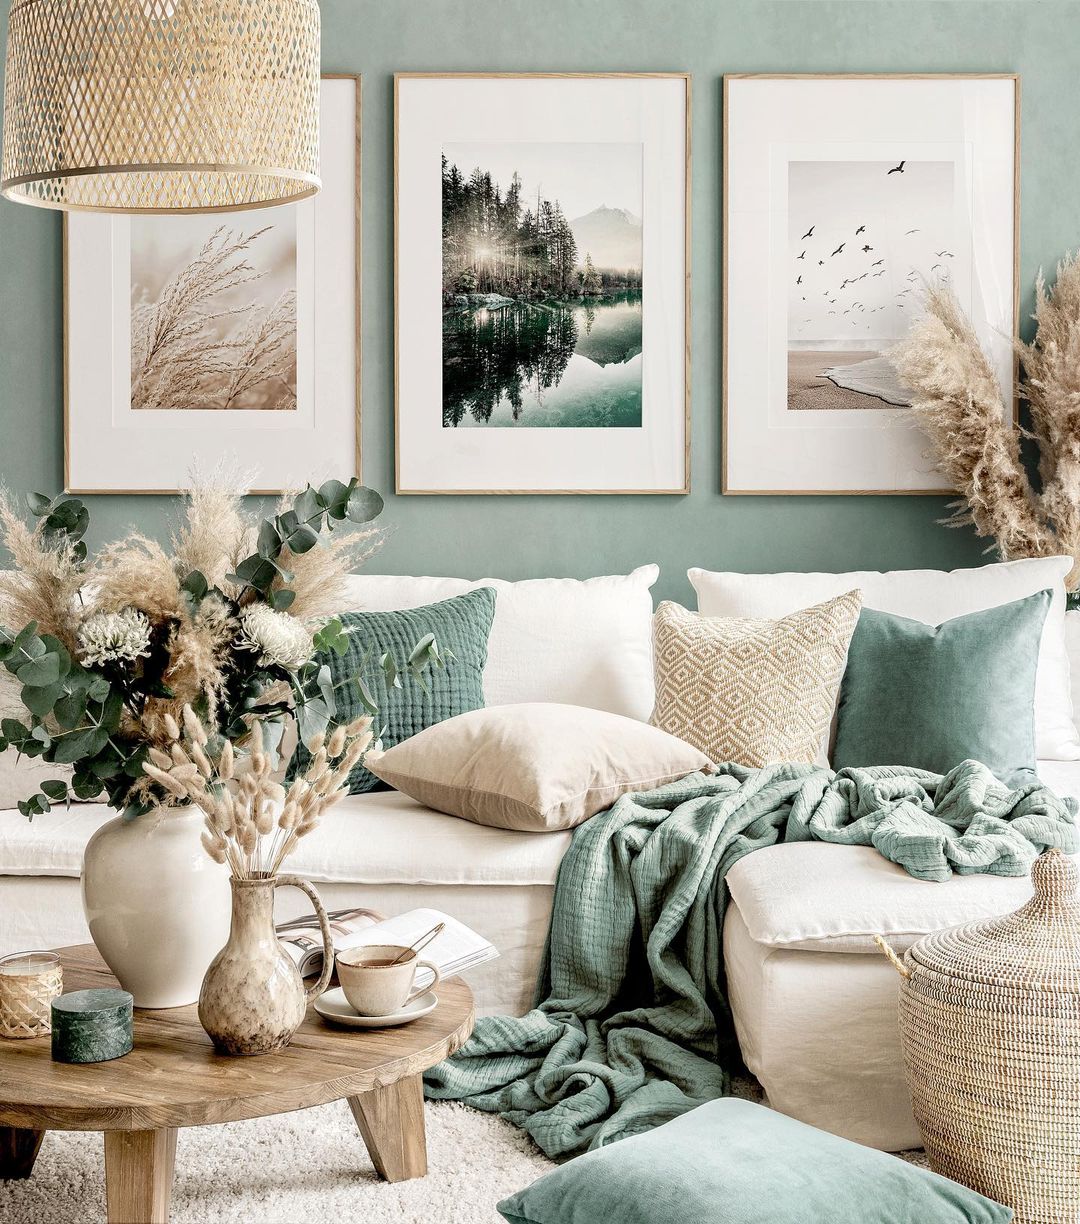 21 Home Decor Trends For 2021 | Decoholic